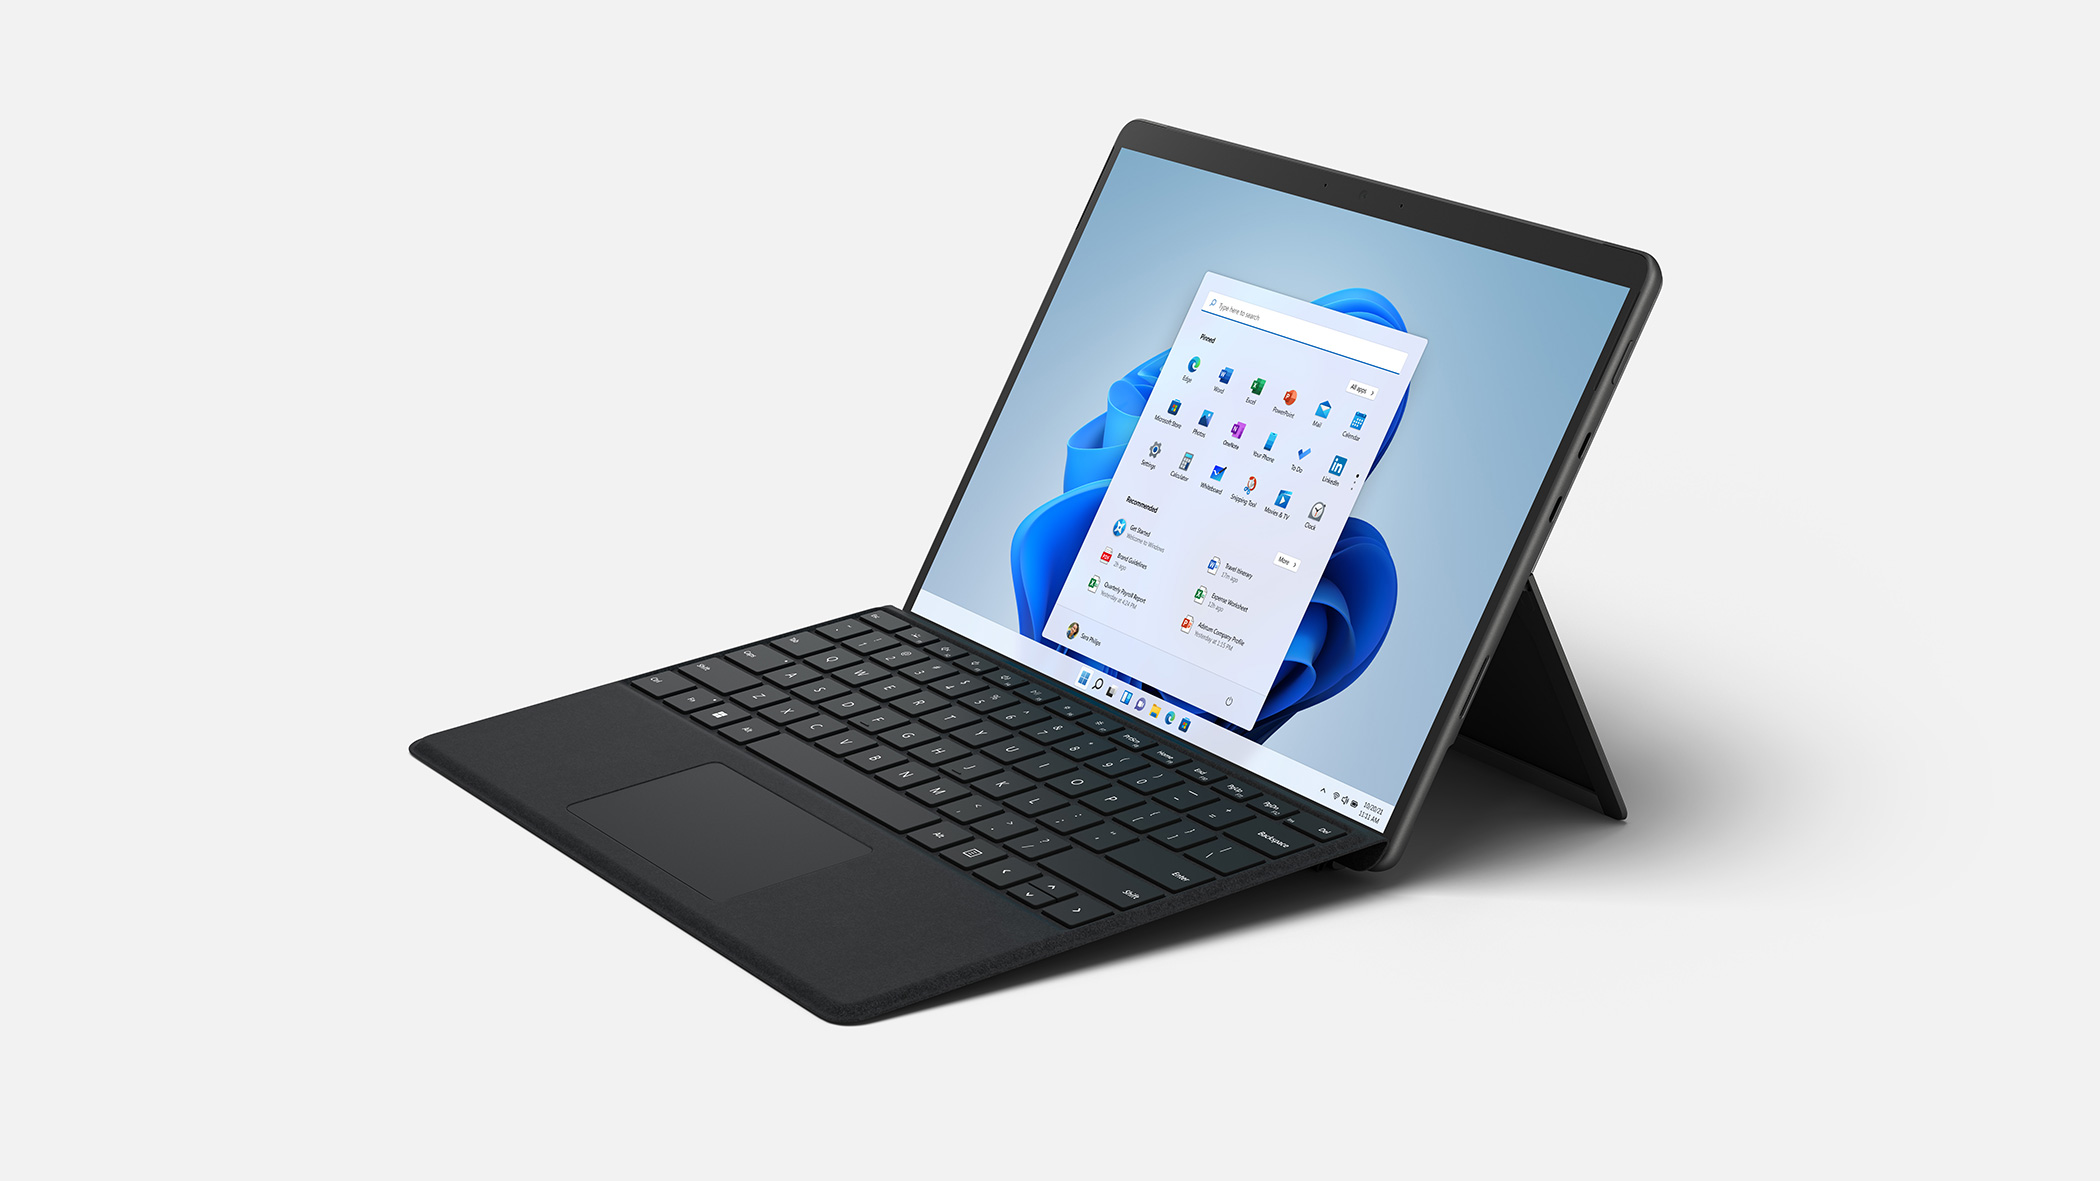 Meet Surface Pro 8 the most powerful 2in1 Surface built for Windows